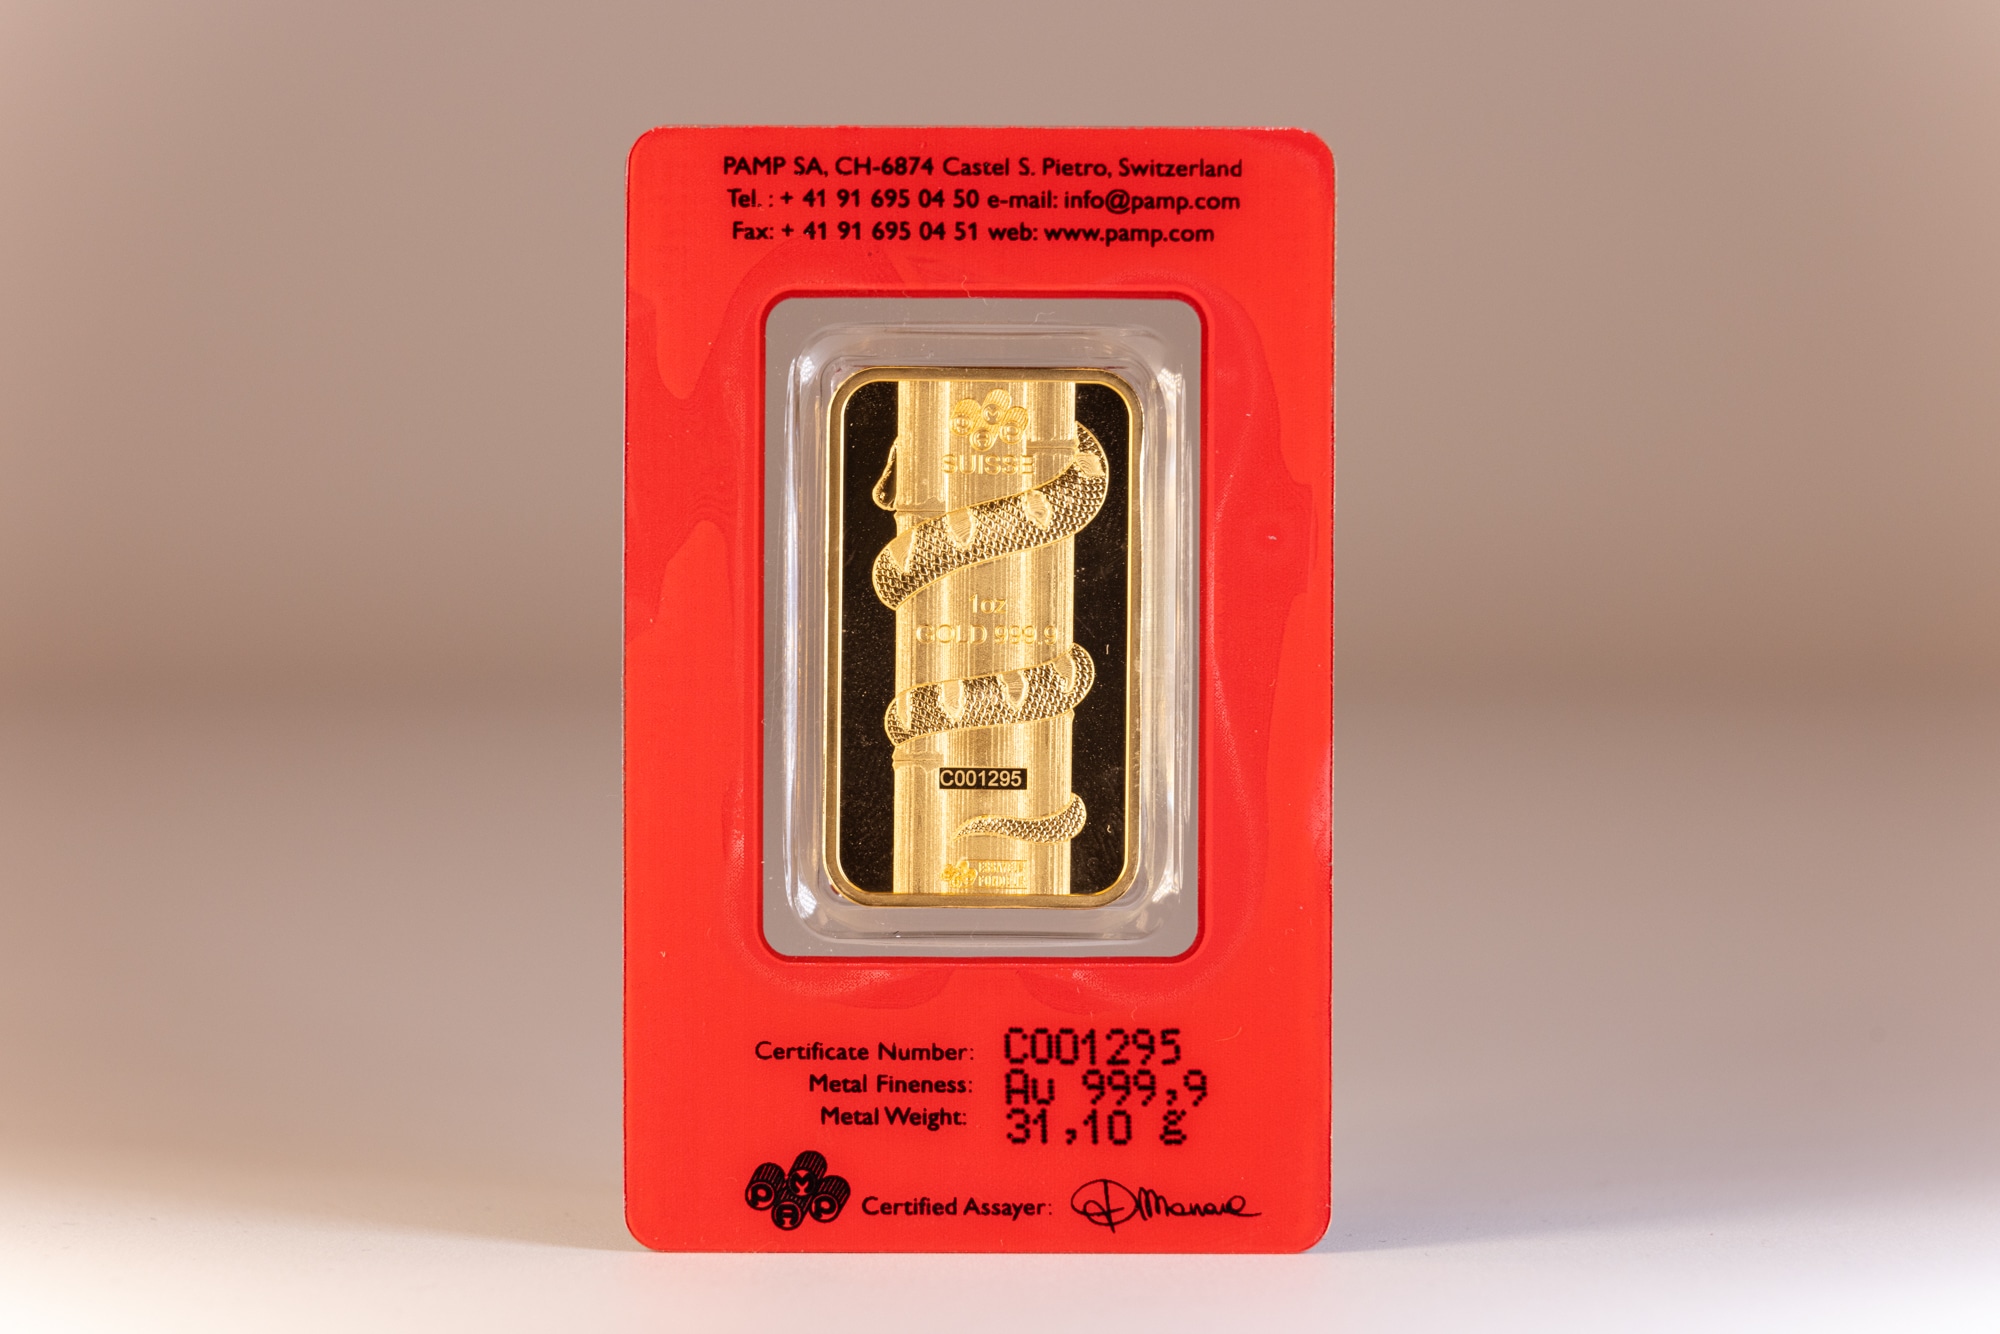 A shiny gold bar featuring a snake design, packaged in the lunar calendar series on a clean white background.